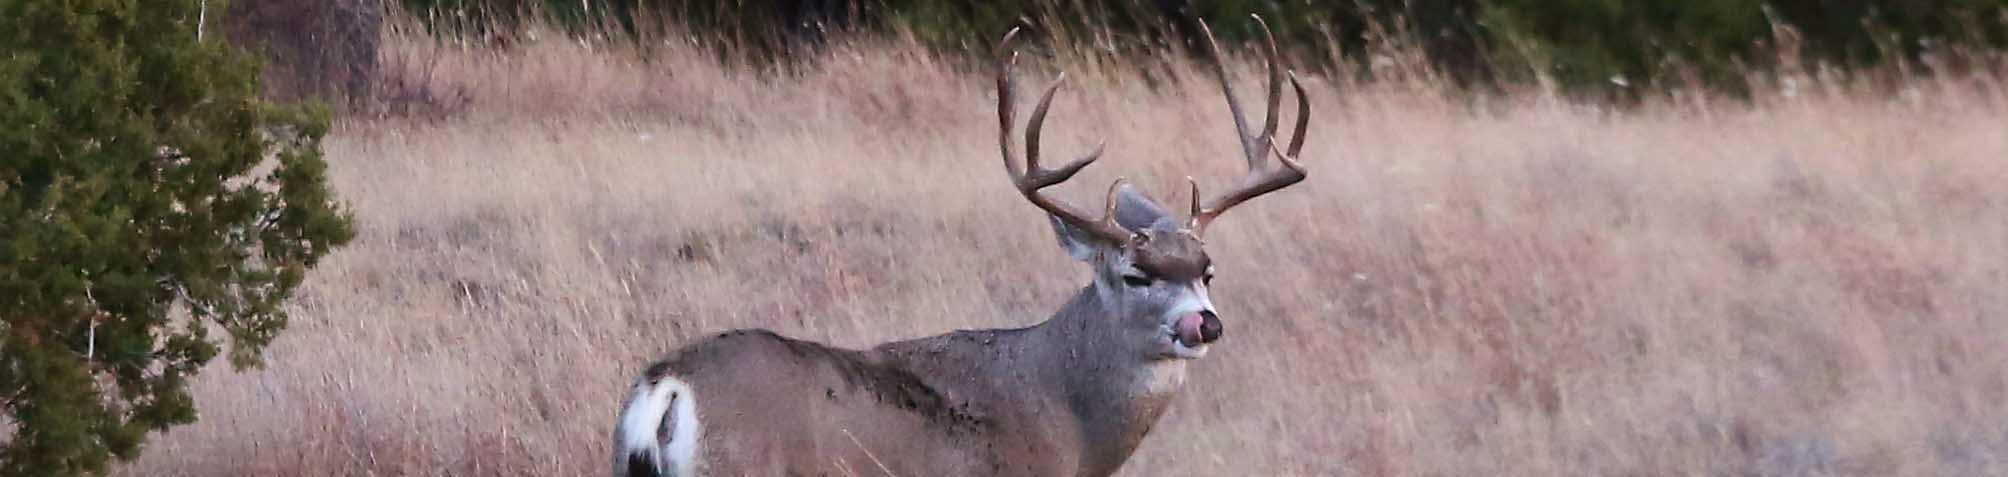 2015 Hunting Pictures